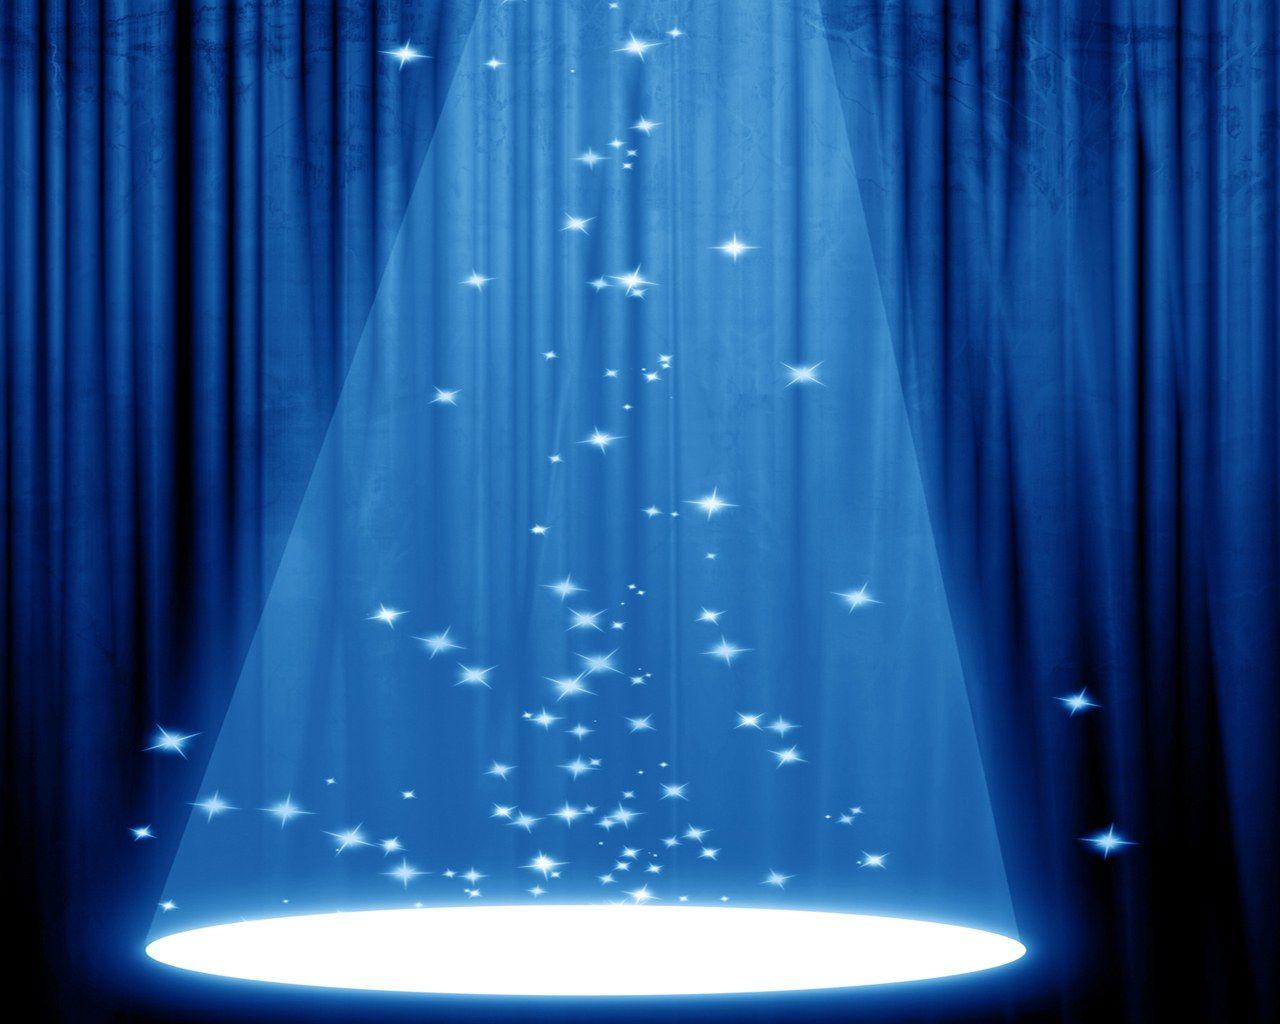 Blue stage lighting Free PPT Background for your PowerPoint